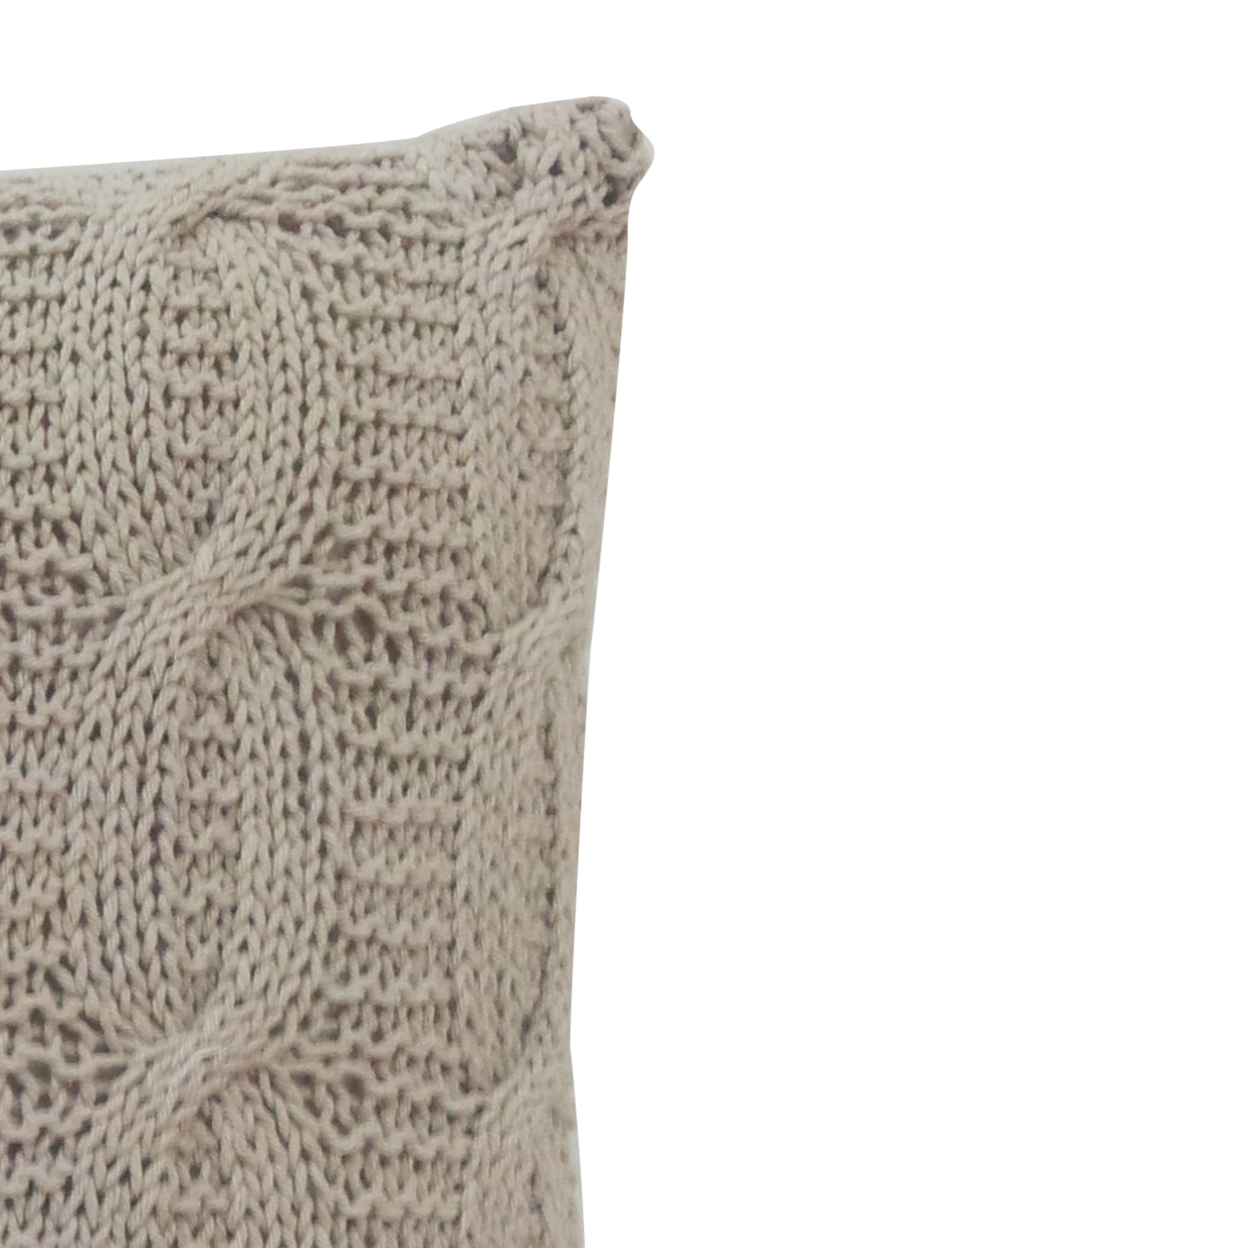 18 X 18 Inch Cotton Cable Knit Pillow With Twisted Details, Set Of 2, Beige- Saltoro Sherpi